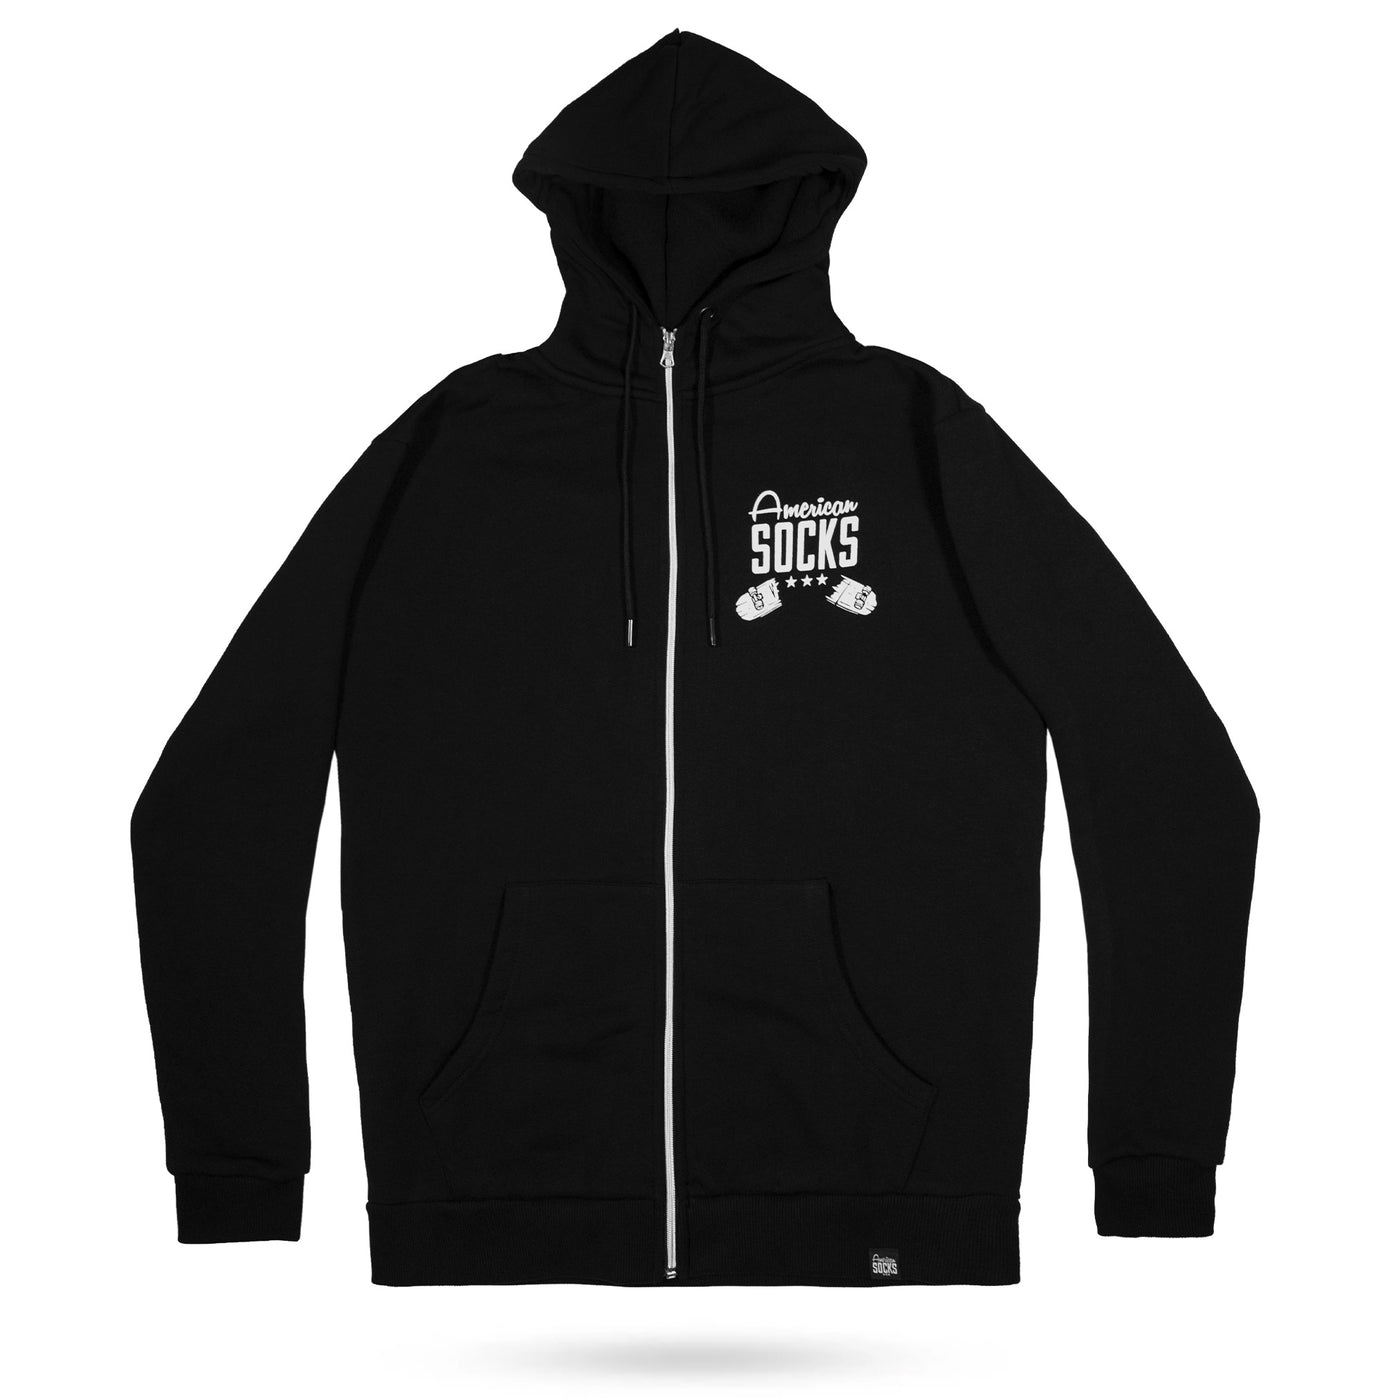 Stoked to the bone - Hoodie